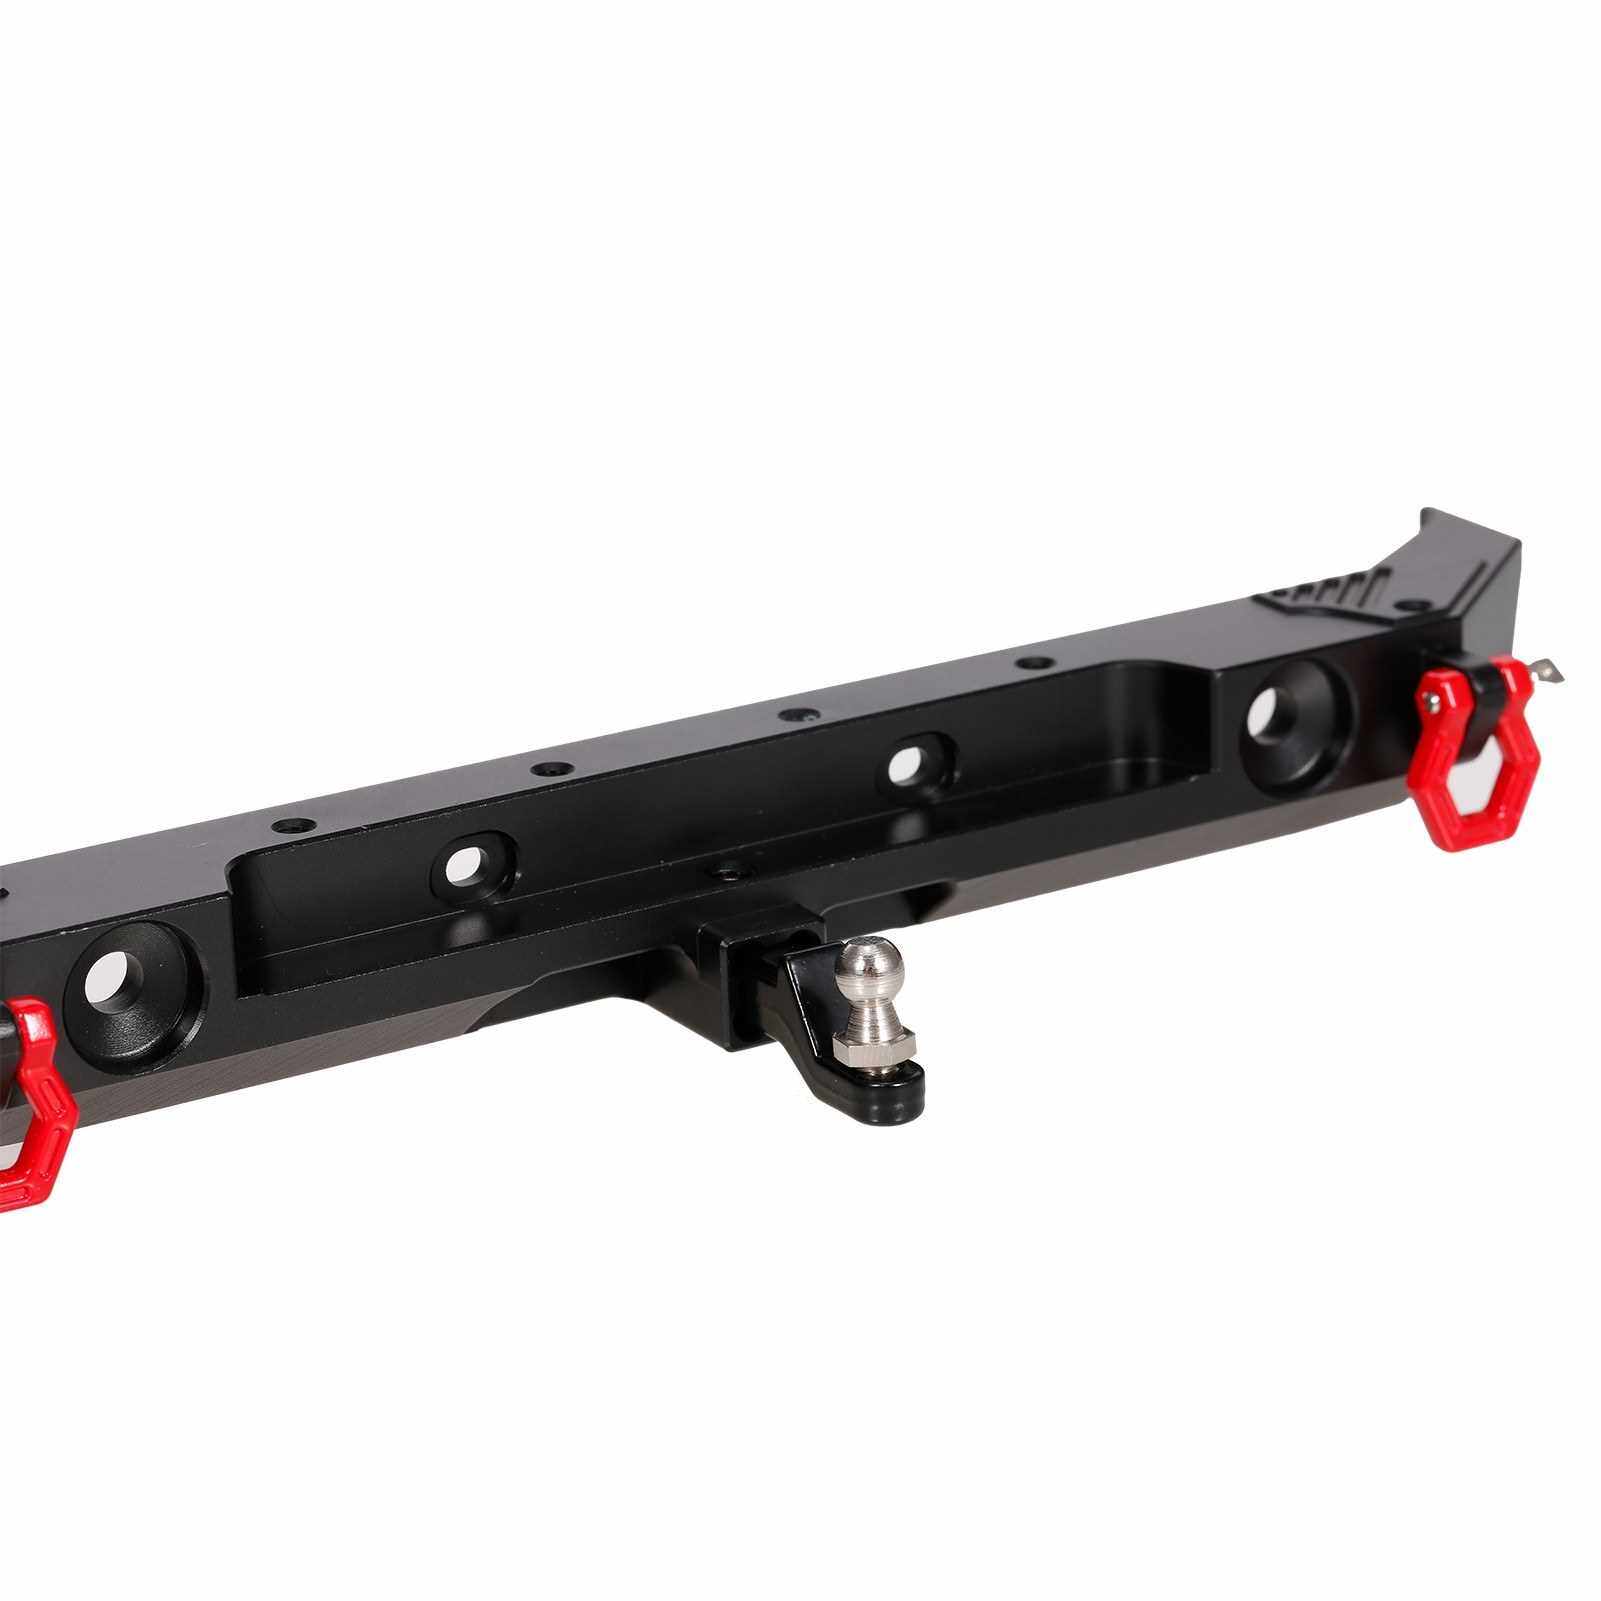 Best Selling 1/10 RC Crawler Car Metal Rear Bumper with D-rings Tow Hitch Shackles&2-LED Lights Compatible with Axial SCX10 I II III 90046 90047 AXI03007 (Standard)